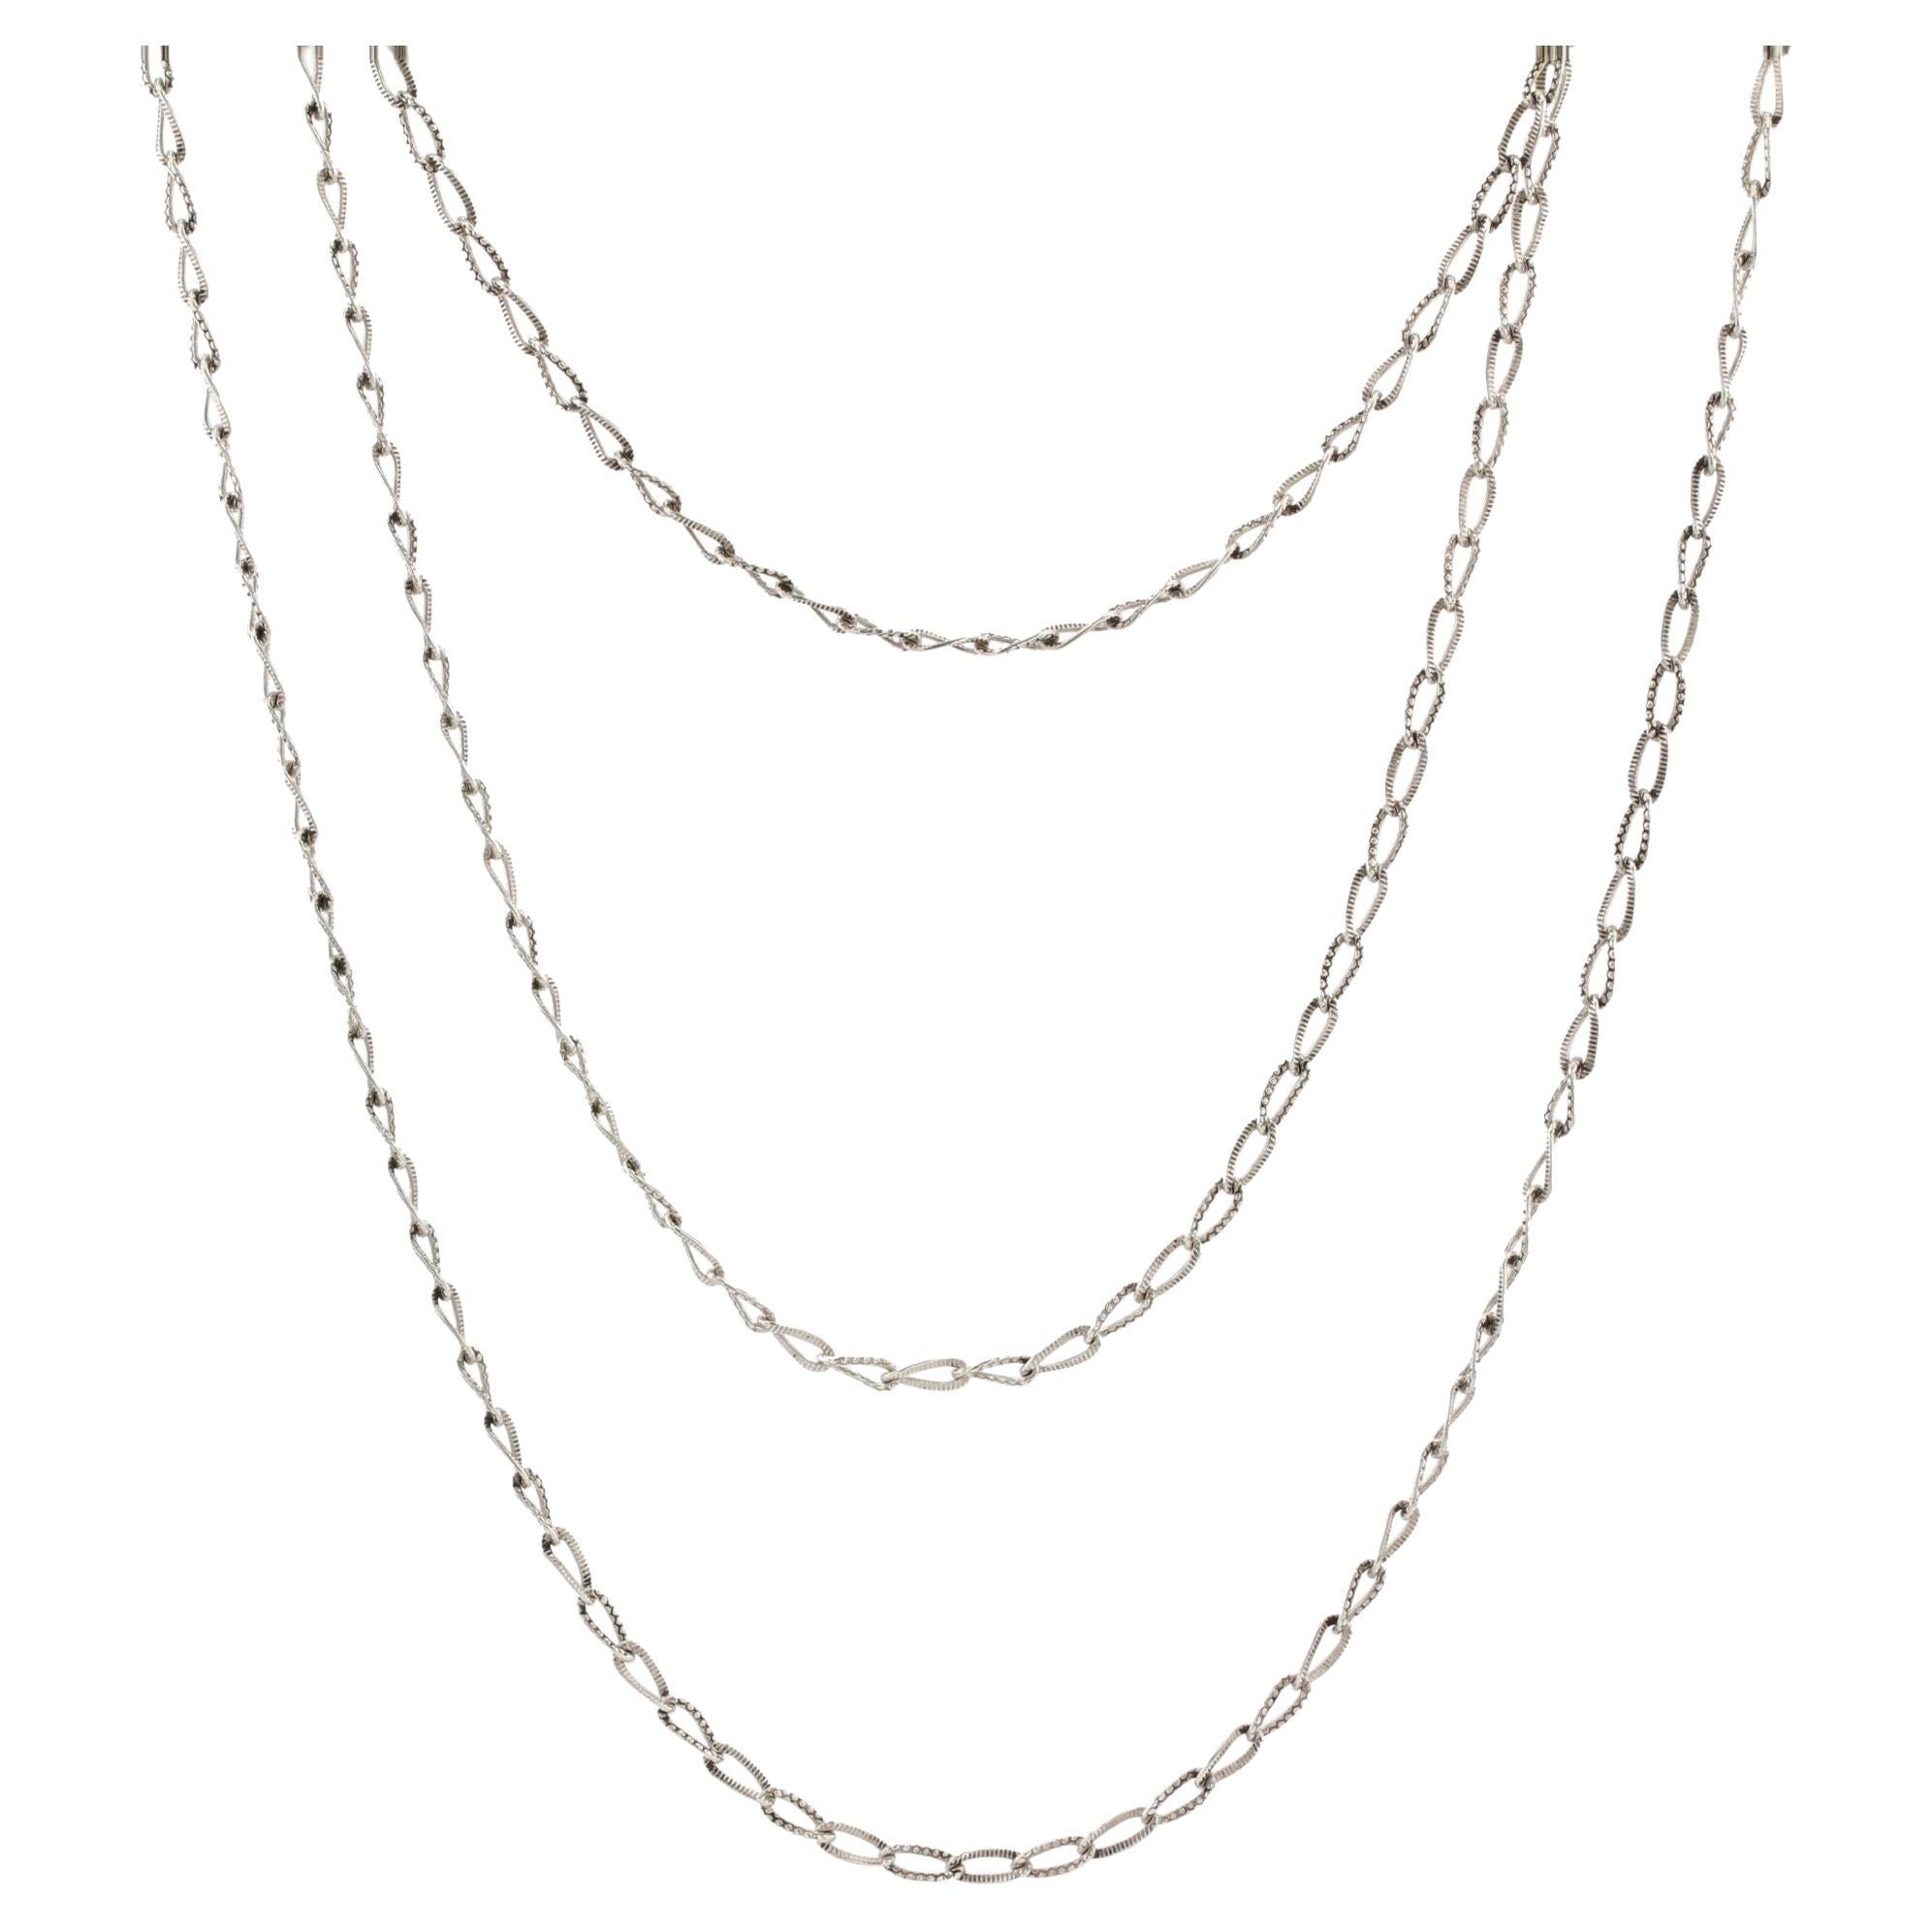 1900s Chiseled Silver Long Chain Necklace For Sale